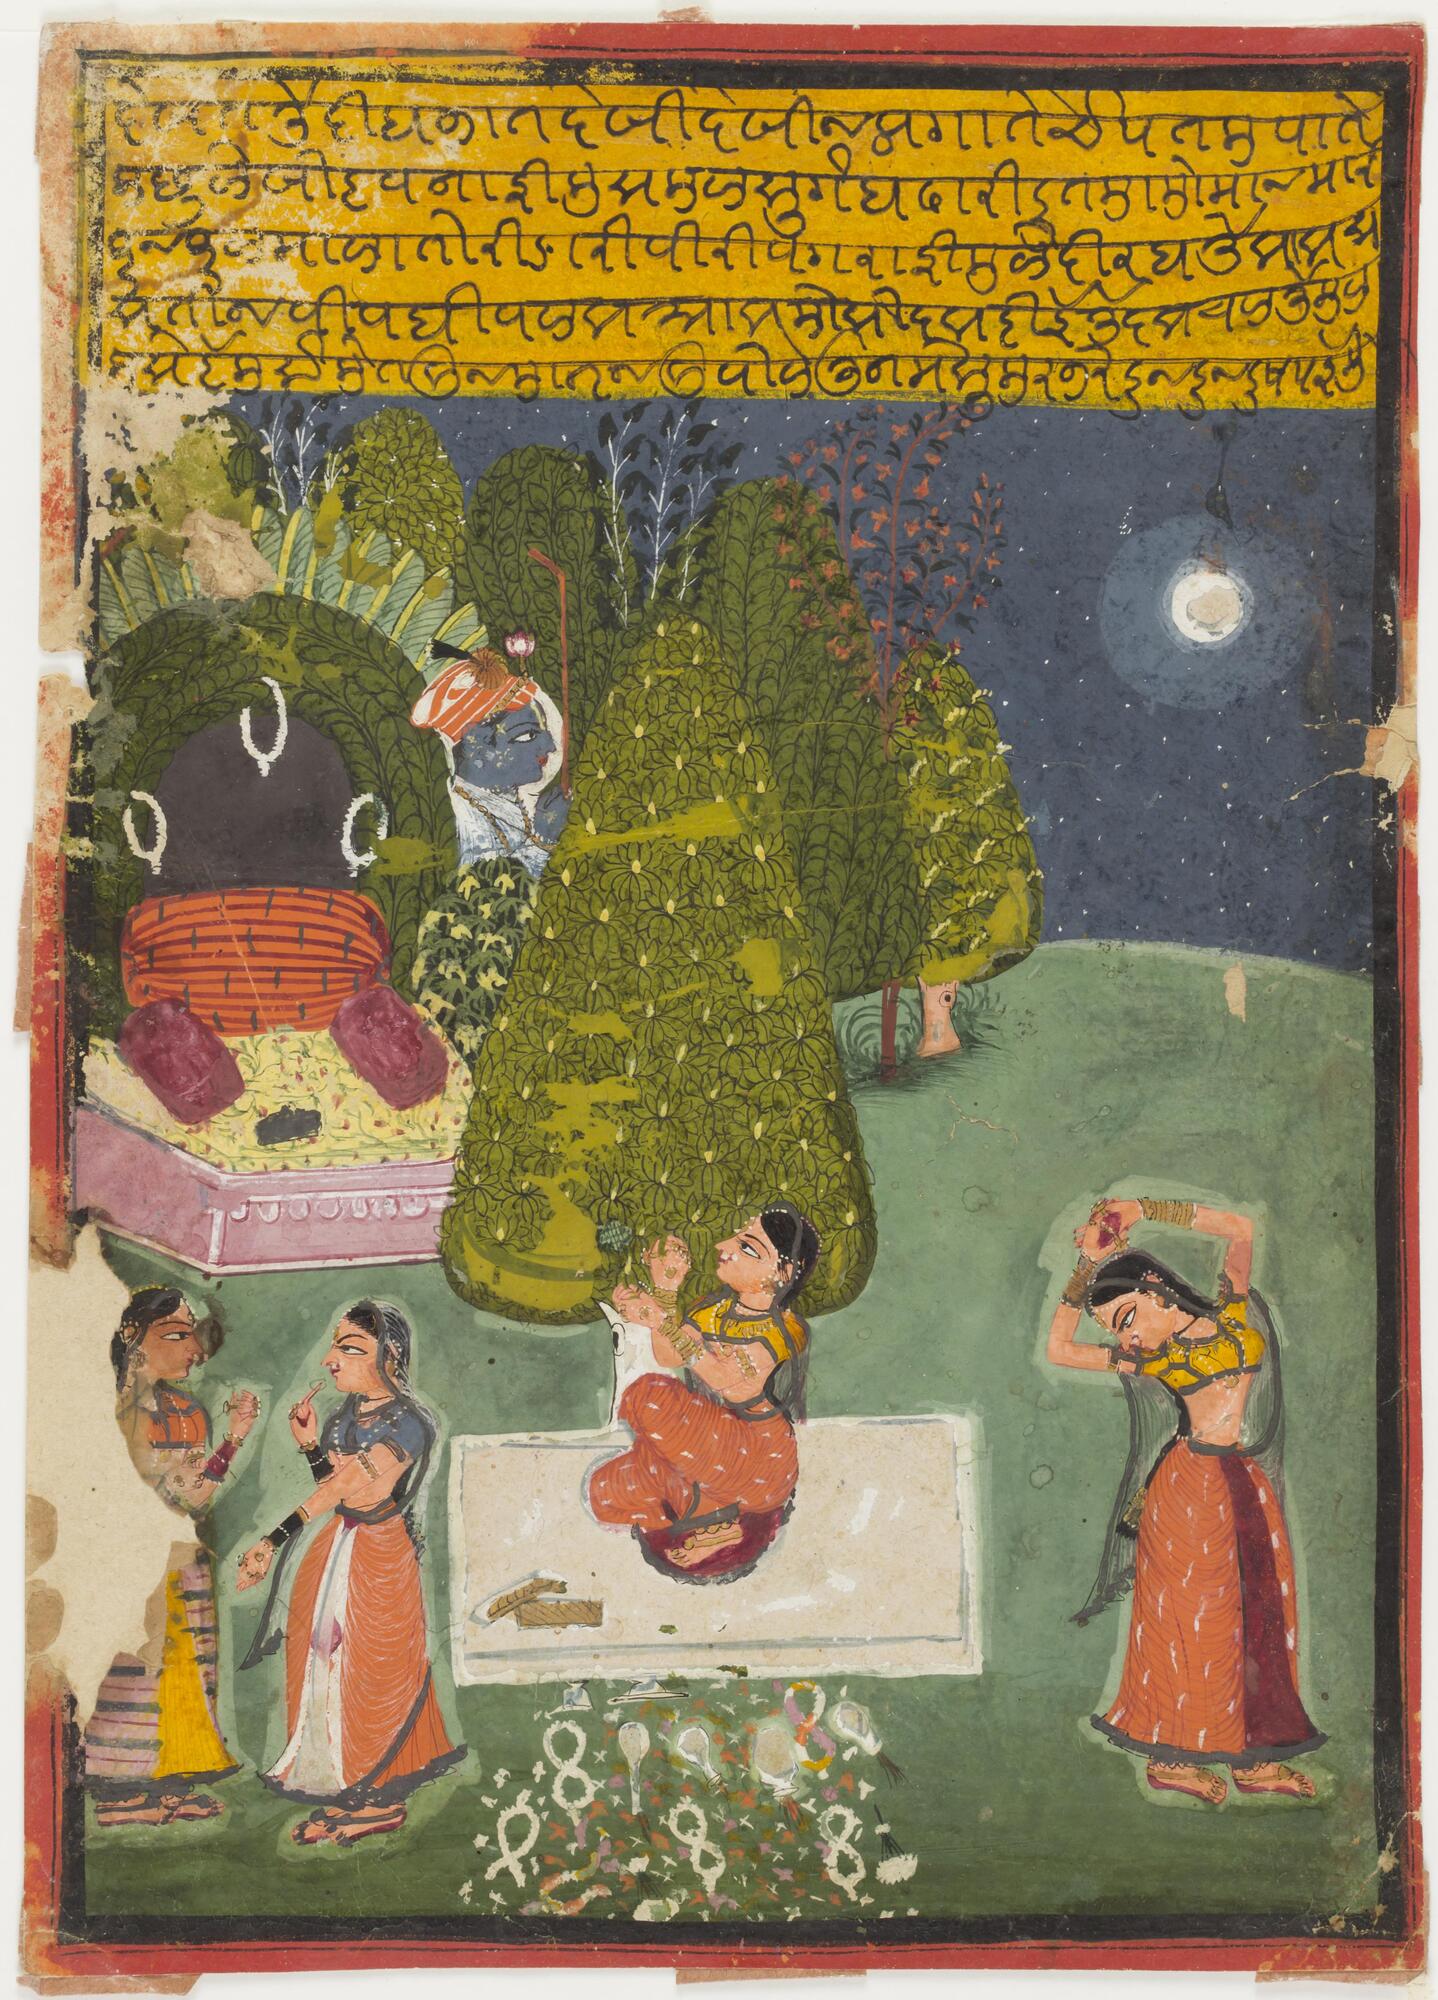 The painting depicts a scene at night with a panel of text at the top. A central female figure sits on a rectangular carpet gazing upwardly at a male face. Three female attendants are standing beside her. A moon shines in the background. 